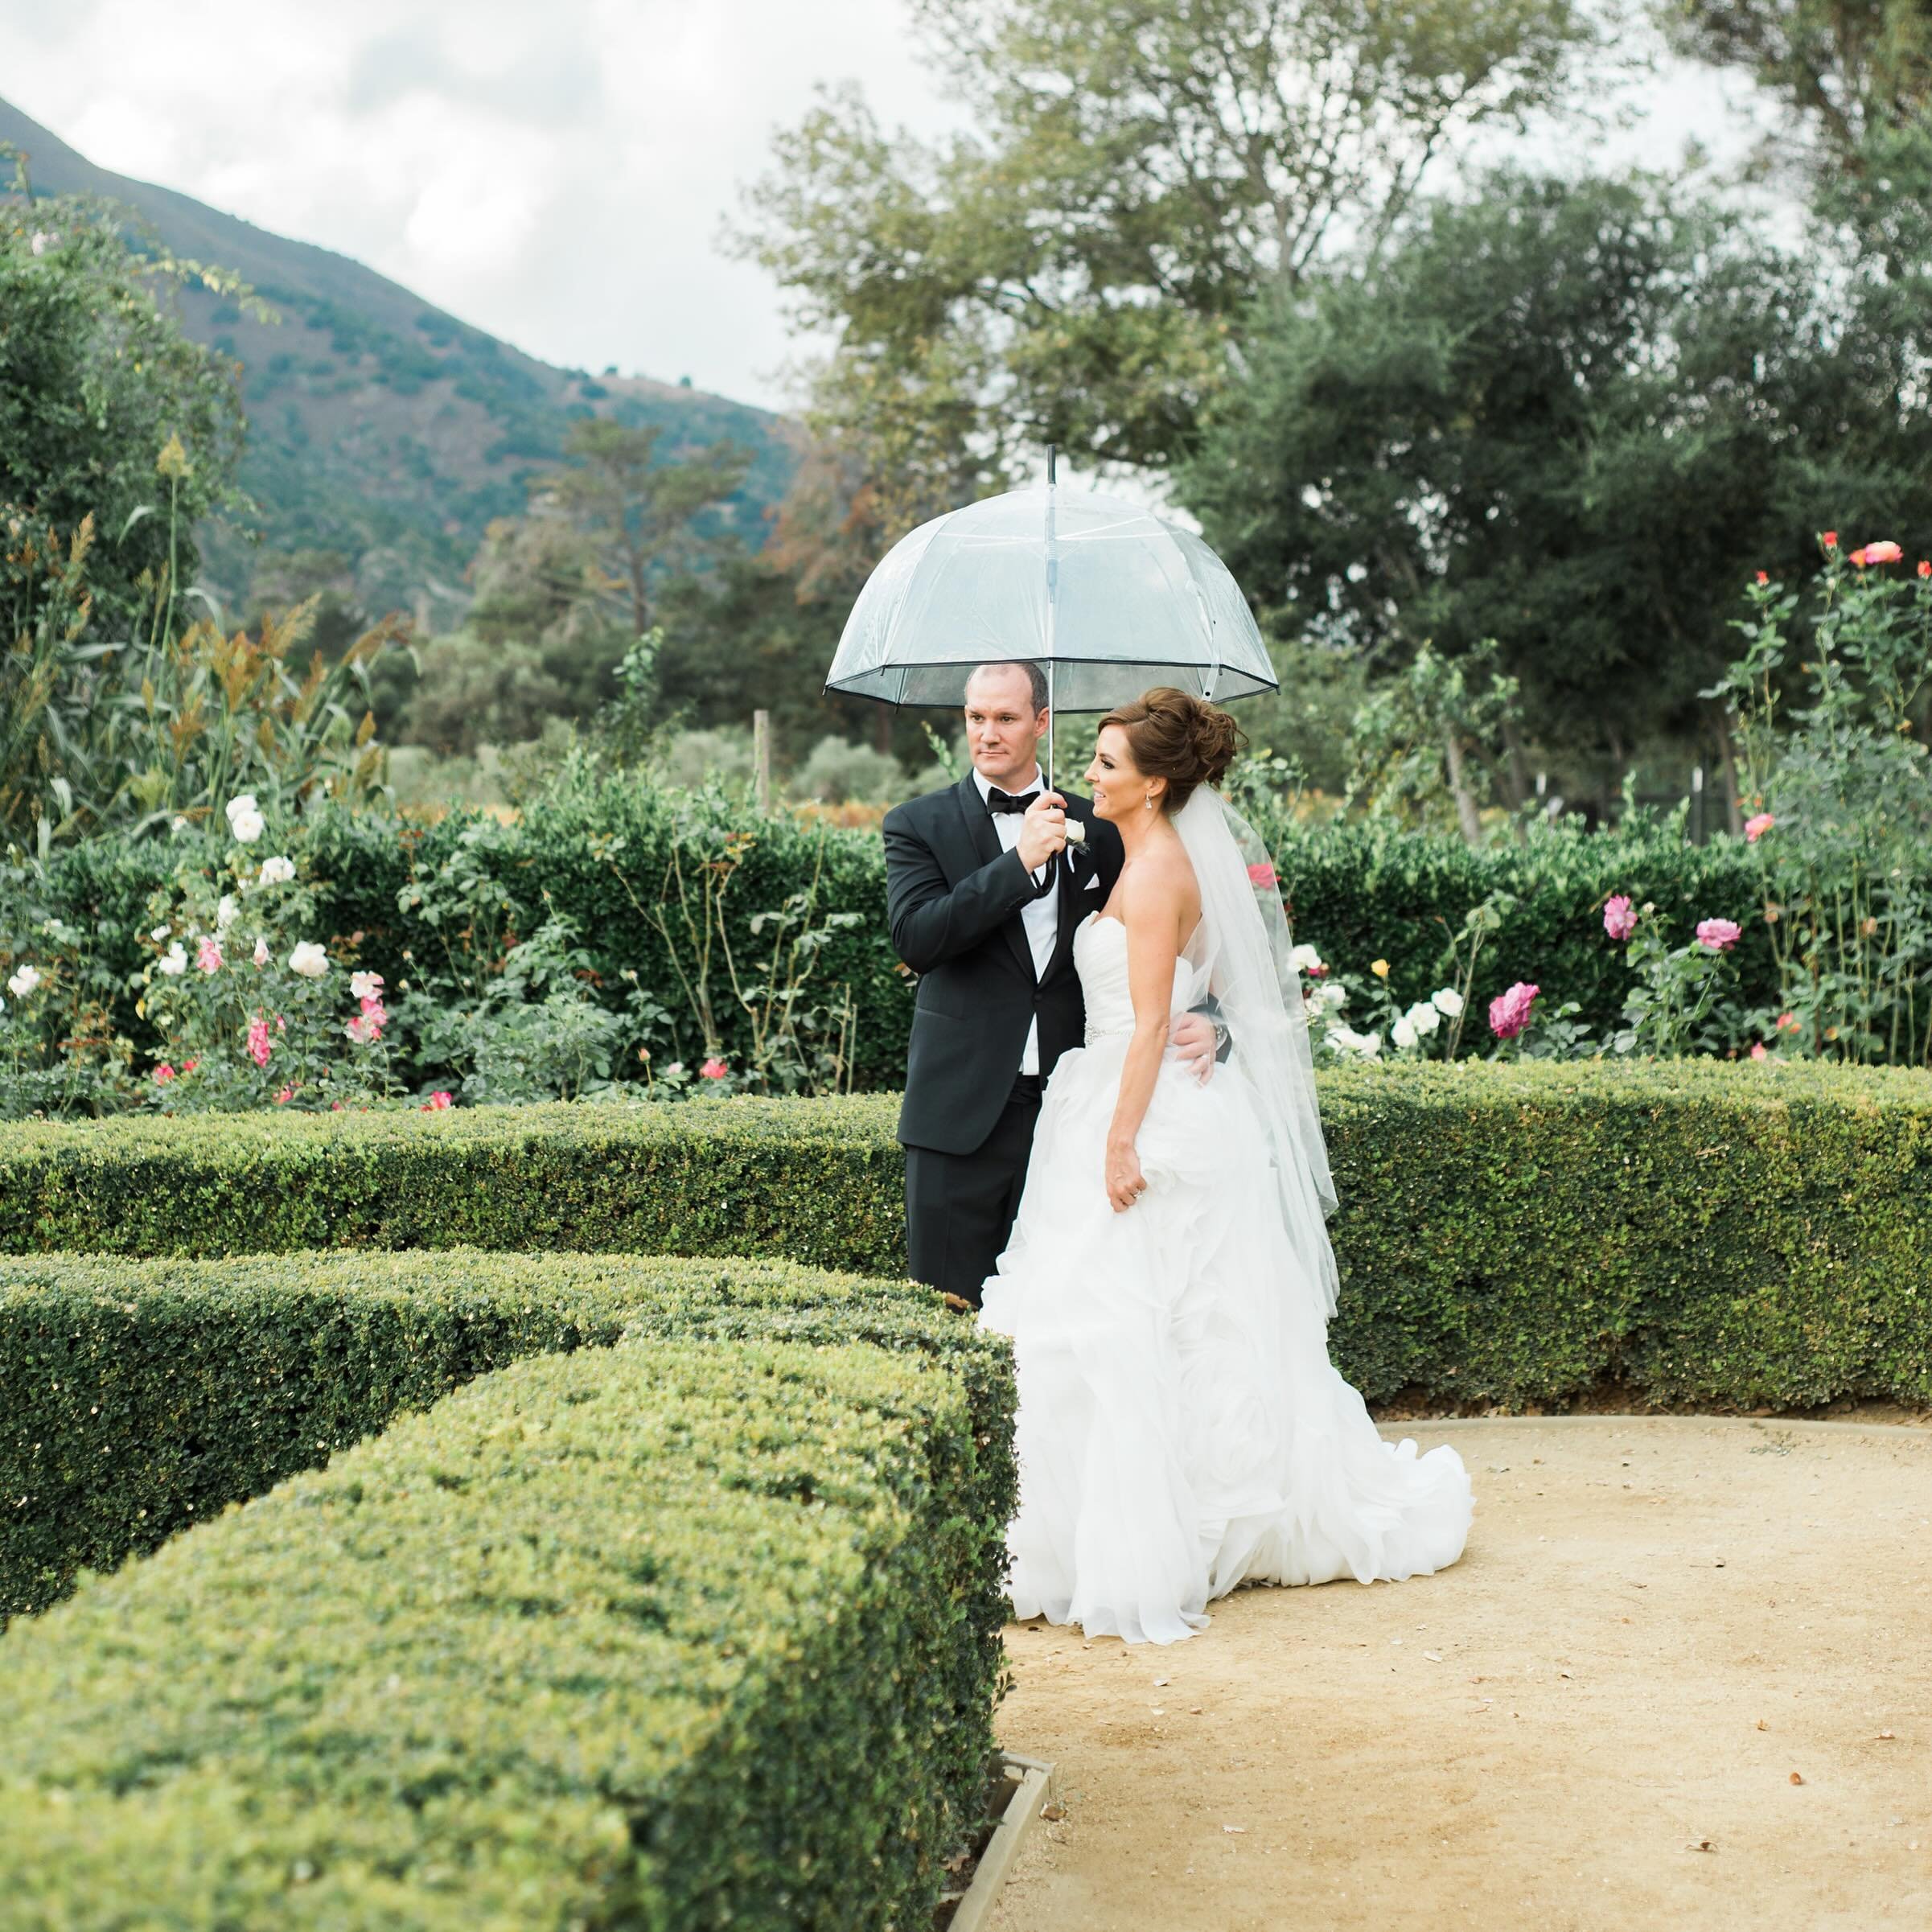 A gentle reminder after the rainy weekend in LA. 

-

Don&rsquo;t lose sight of what your wedding is all about: Your marriage! At the end of the day, what truly matters is that you are marrying your best friend.  Remember, you get to spend every day 